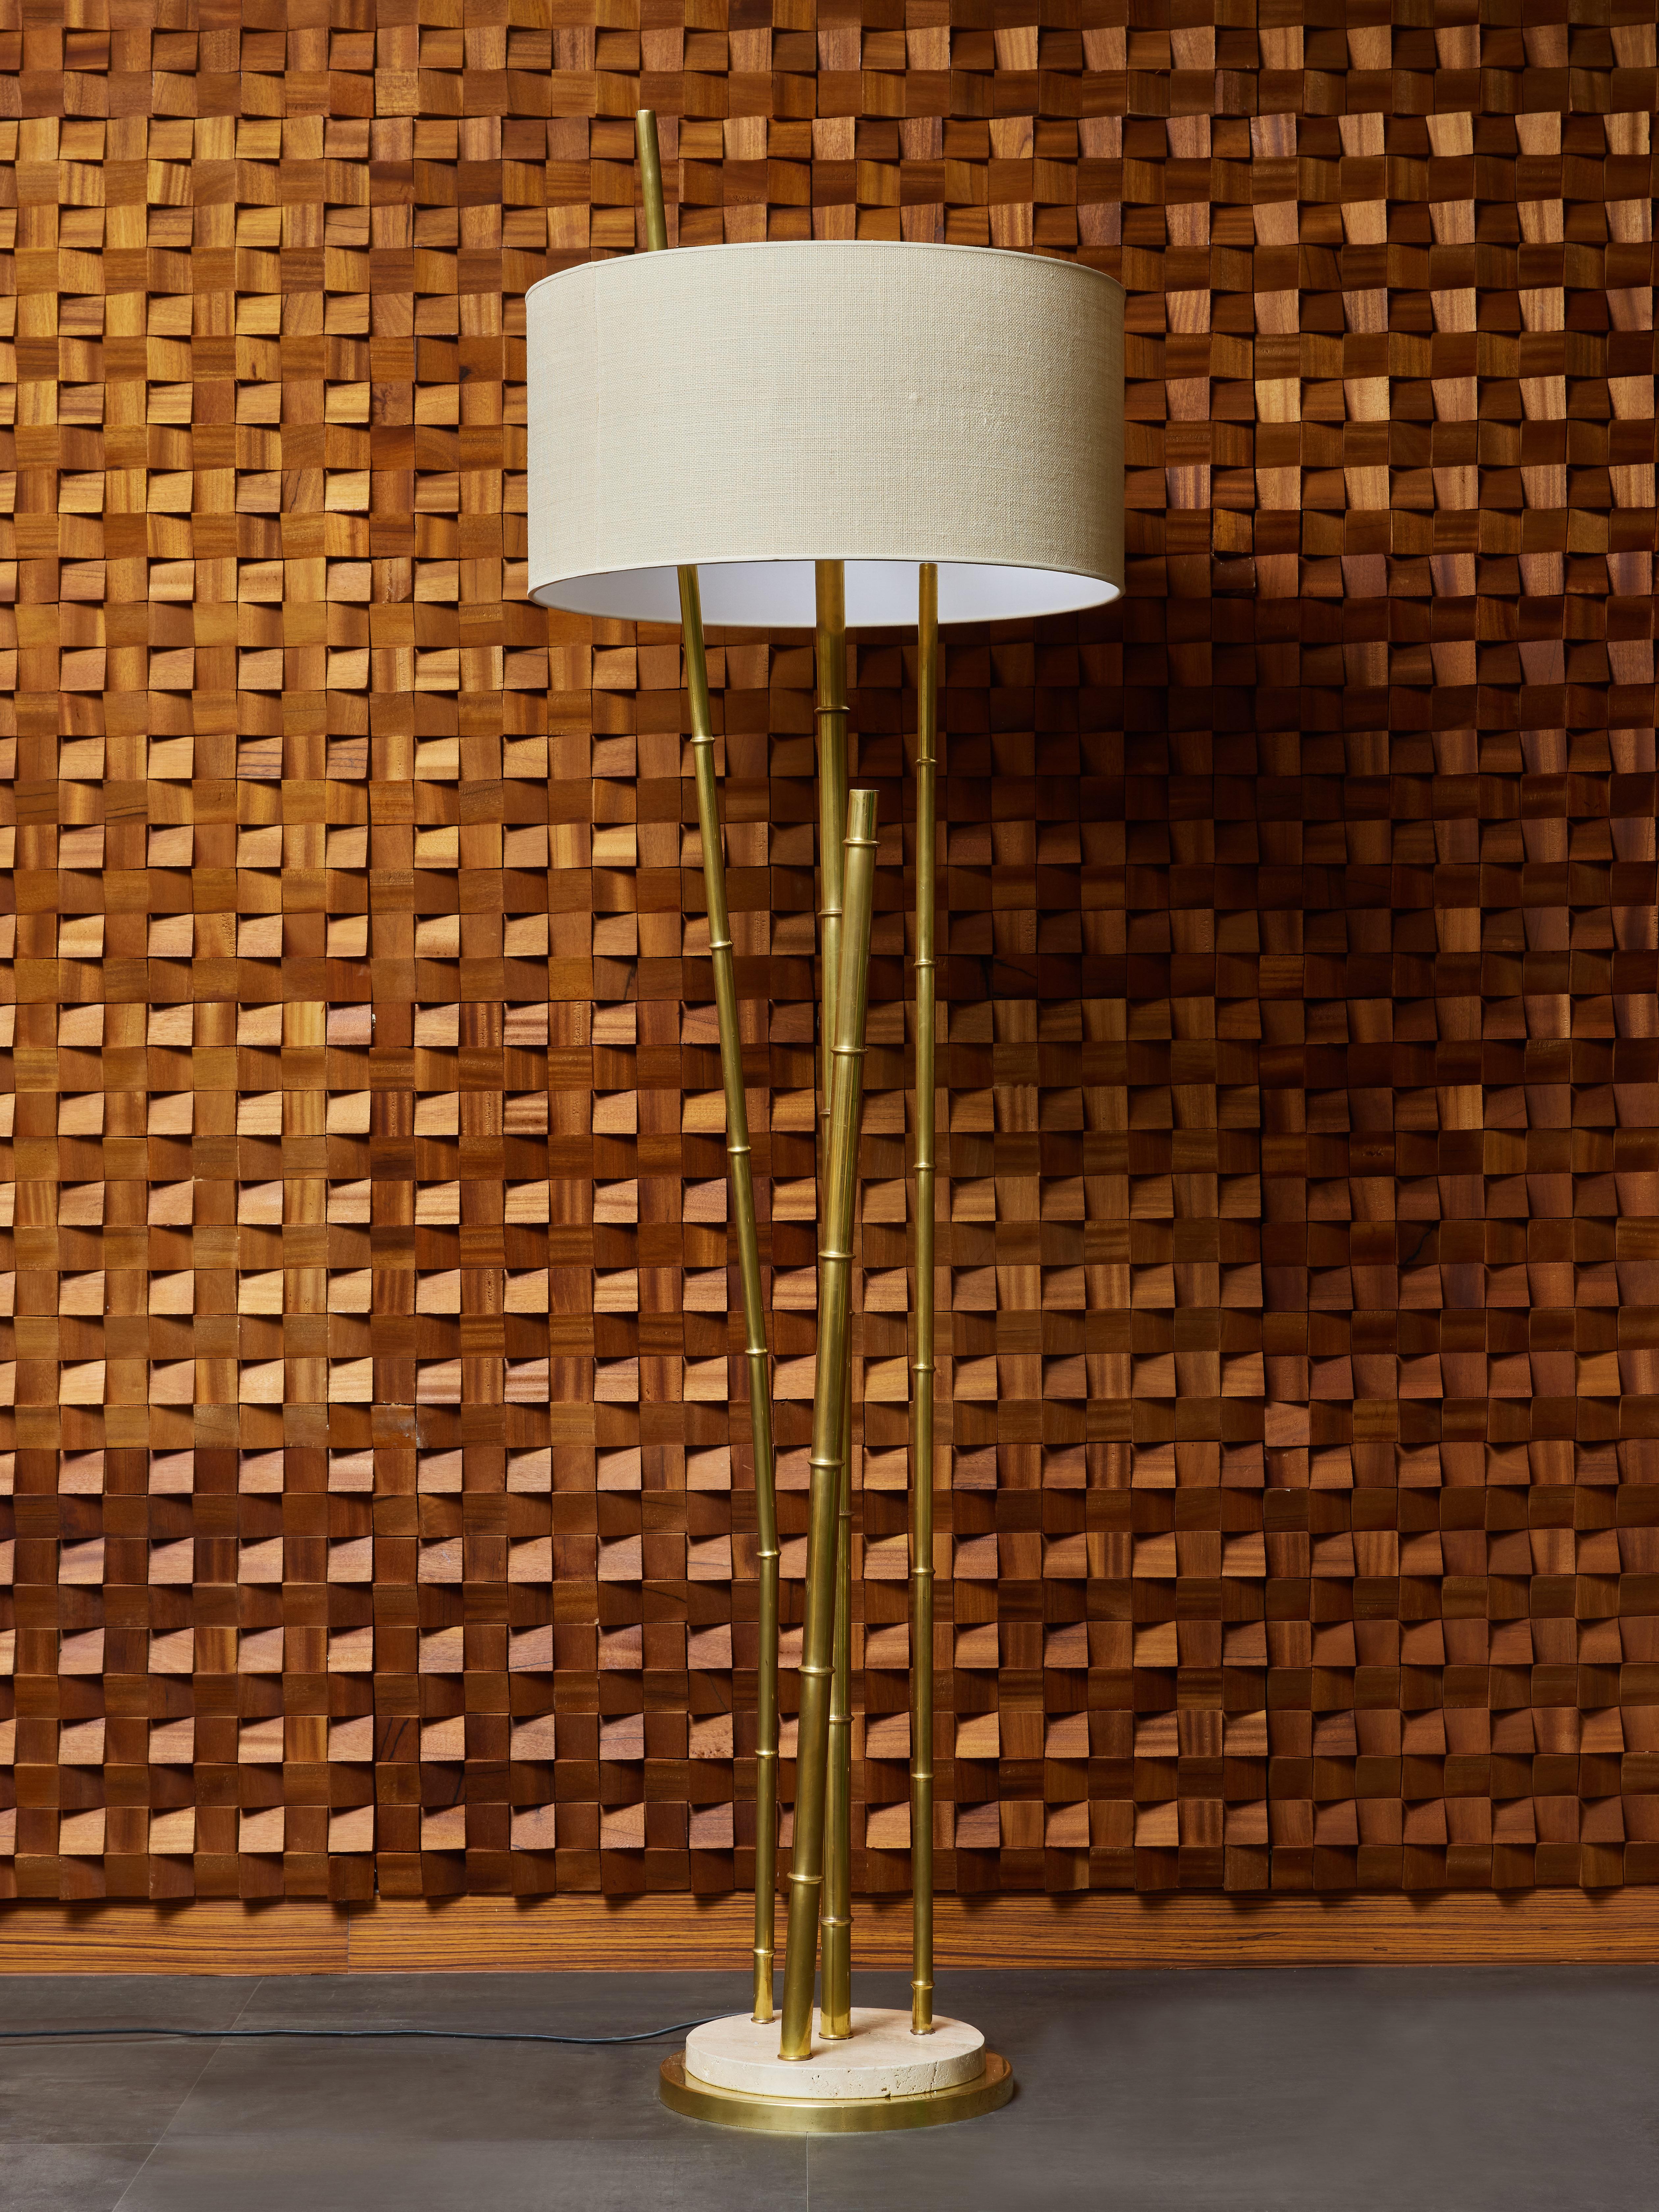 Tall floor lamp made of a circular double base in brass and travertine, bamboo shaped arm of light and decors, topped with a fabric shade.